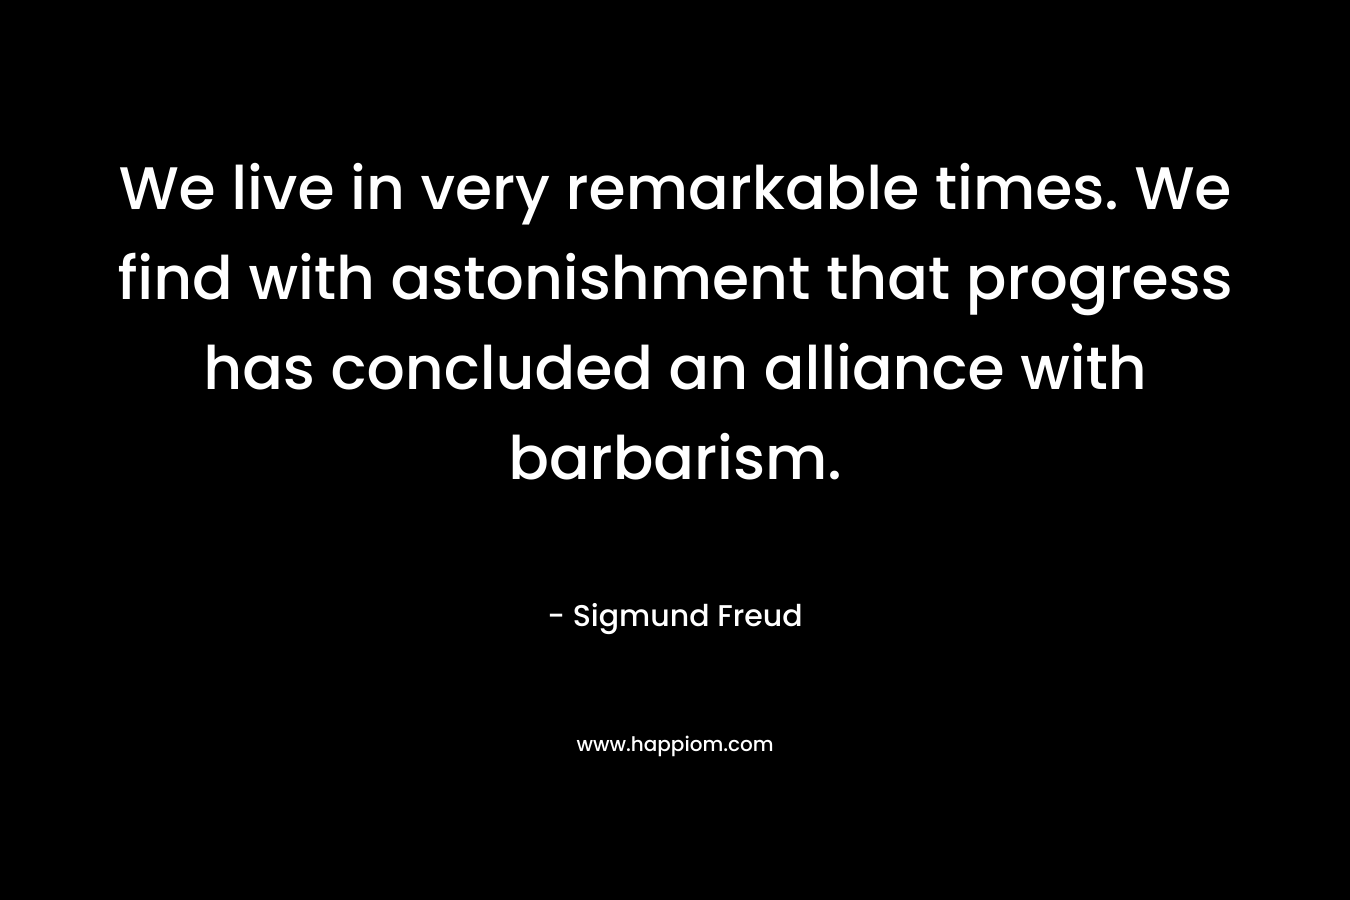 We live in very remarkable times. We find with astonishment that progress has concluded an alliance with barbarism. – Sigmund Freud